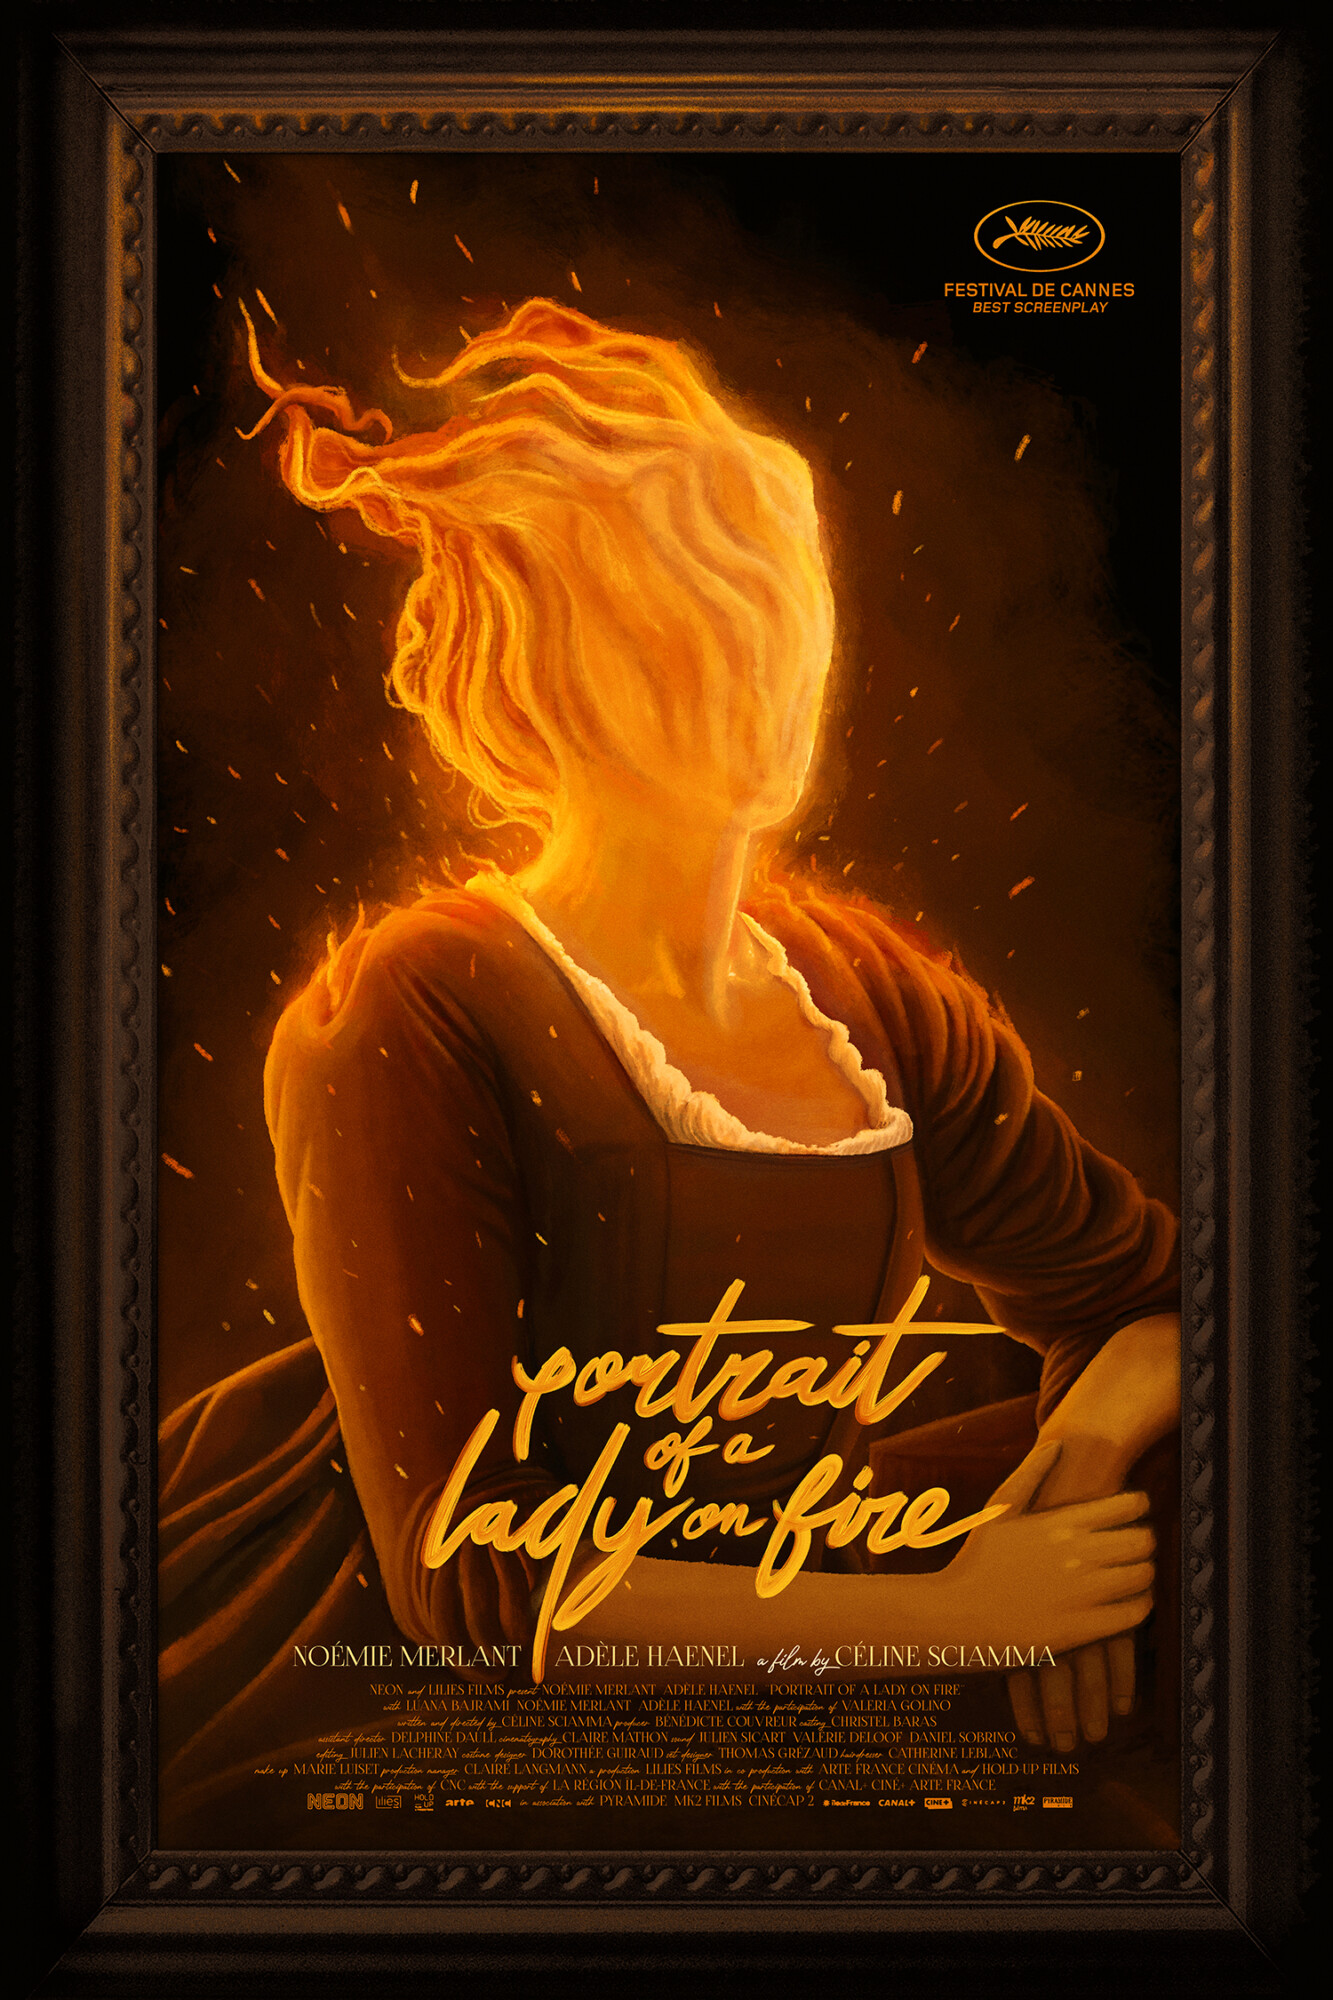 A Portrait of A Portrait of a Lady on Fire